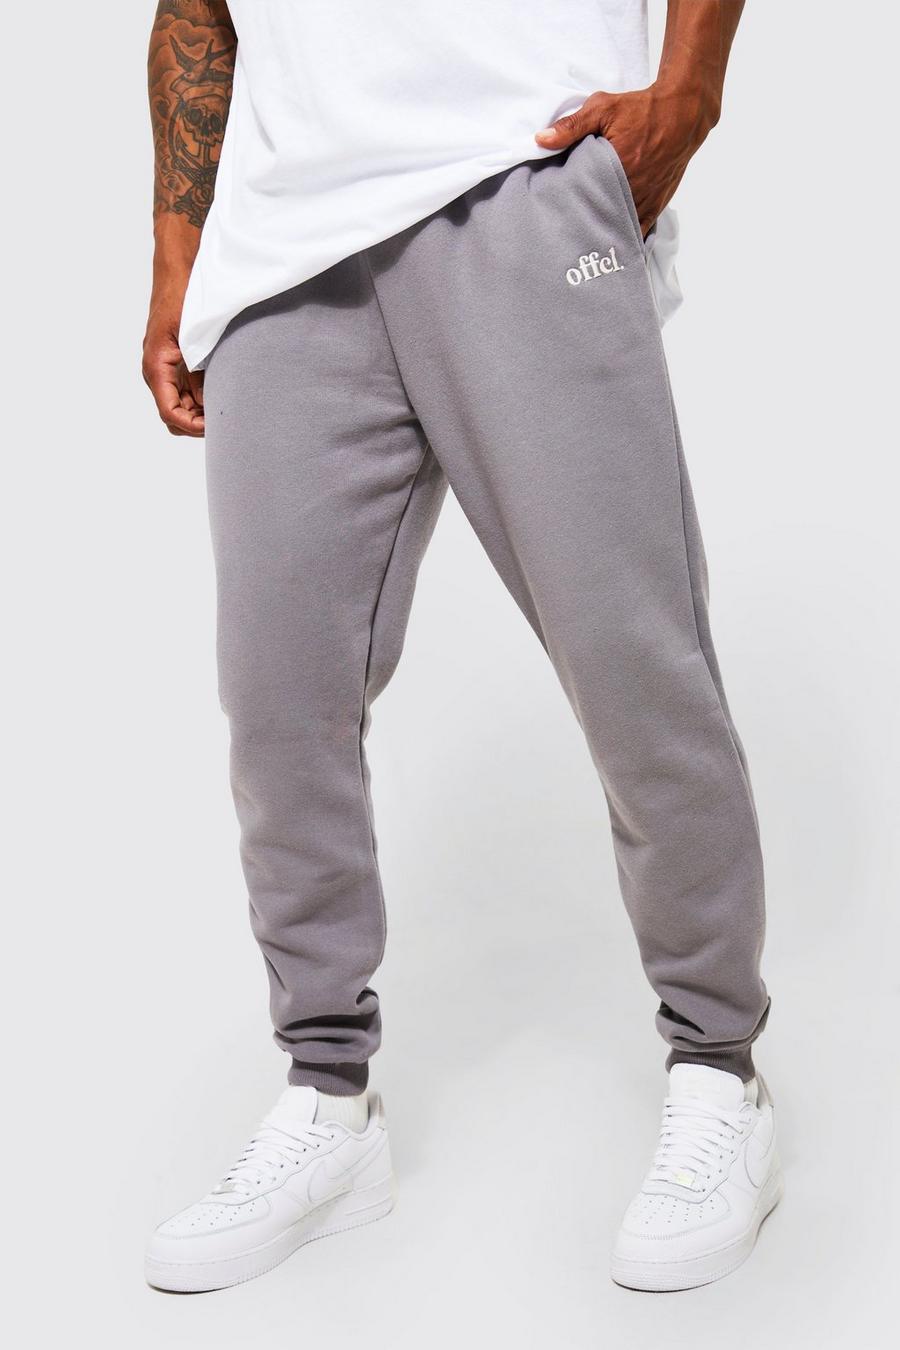 Charcoal grey Offcl Slim Fit Jogger